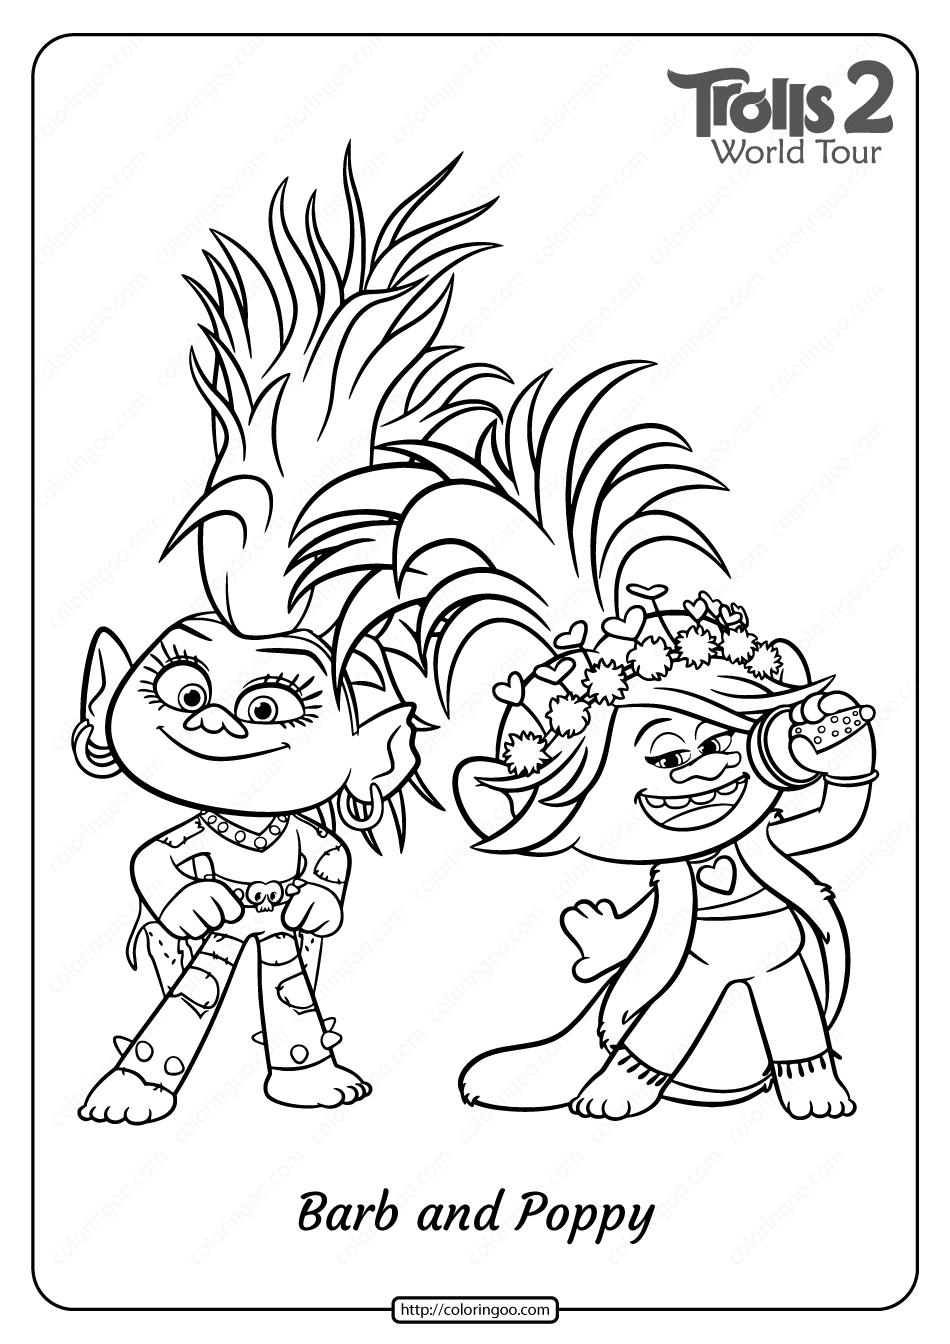 Printable Trolls 2 Barb and Poppy Pdf Coloring Page | Poppy coloring page, Coloring  pages, Disney coloring pages